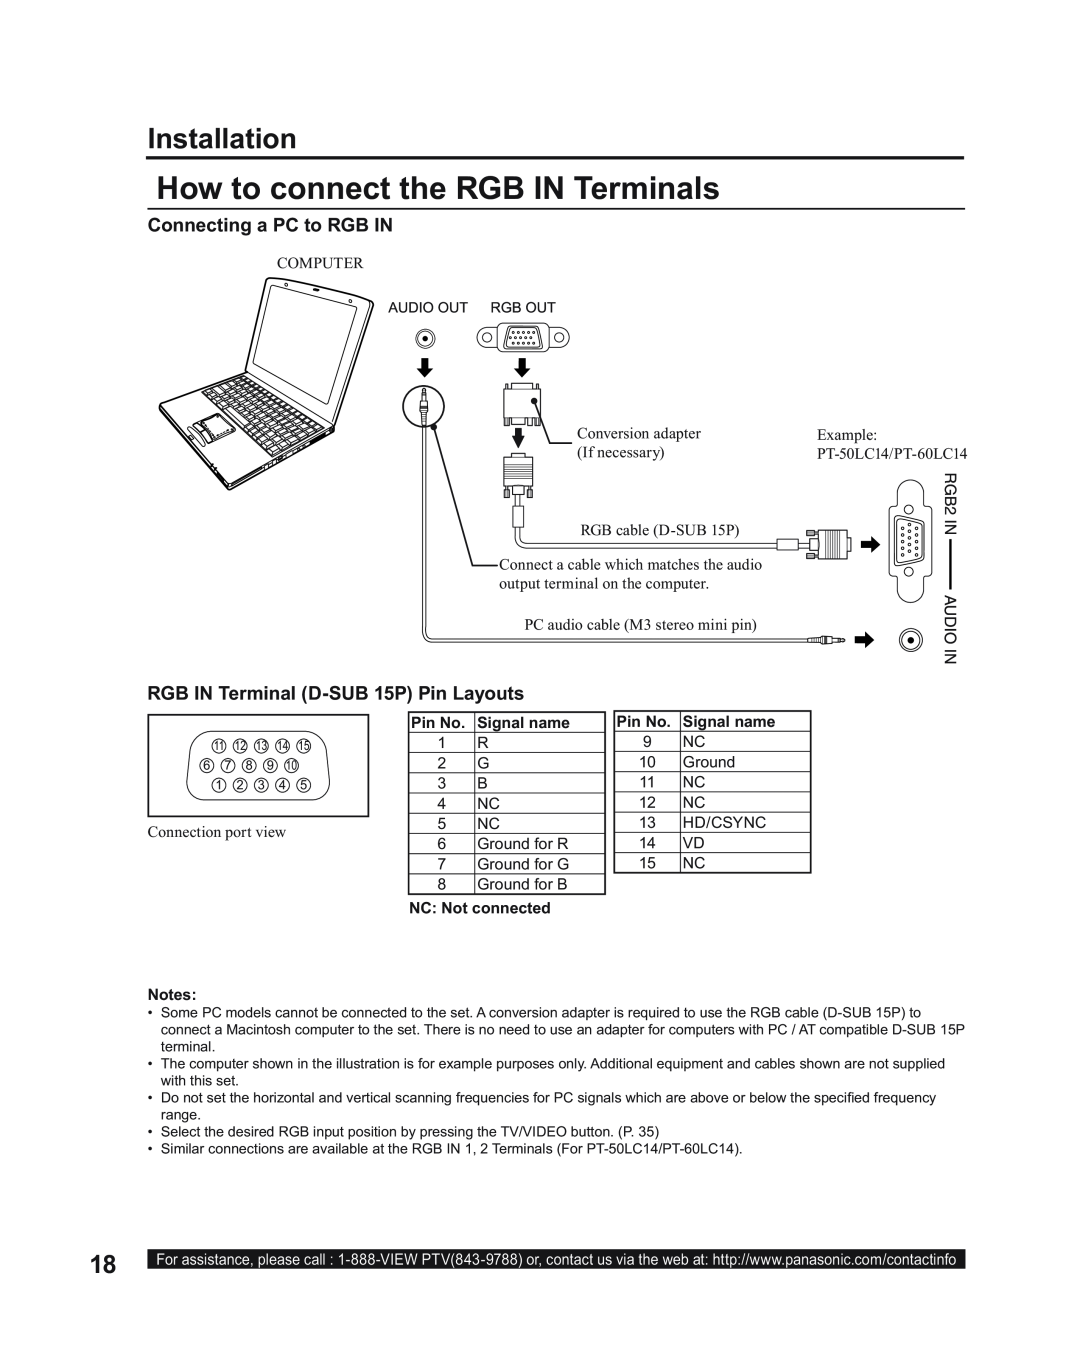 Panasonic PT-43LC14 How to connect the RGB IN Terminals, Connecting a PC to RGB IN, RGB IN Terminal D-SUB 15P Pin Layouts 